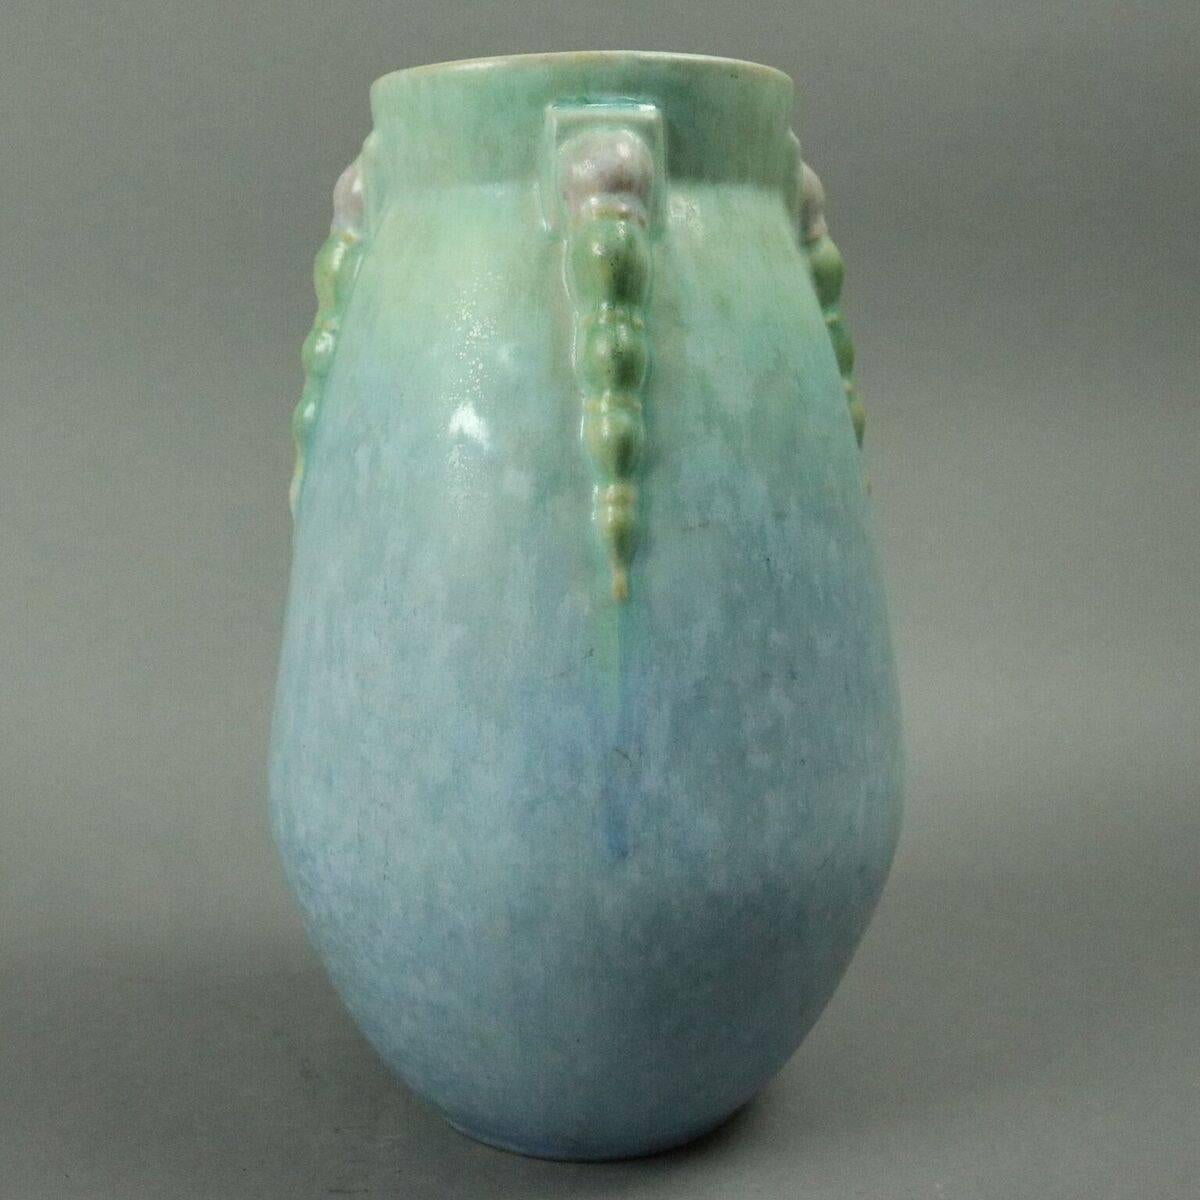 Art Deco Roseville Topeo art pottery vase in blue with matte finish, circa 1930

Meaures - 9.5